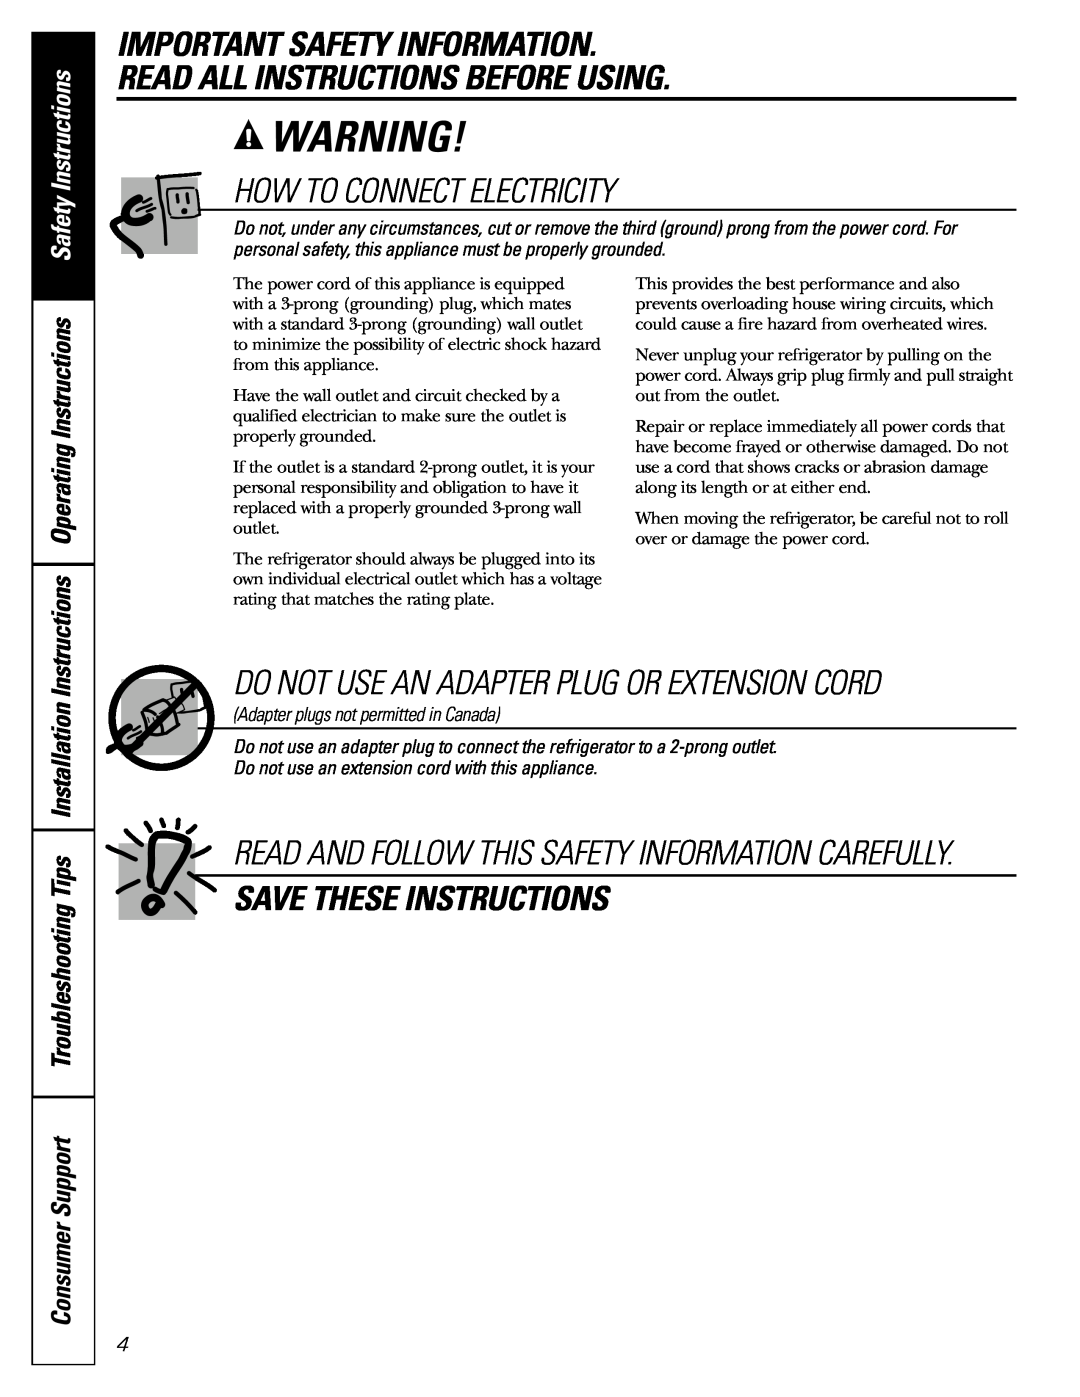 GE 42, 48 How To Connect Electricity, Save These Instructions, Read And Follow This Safety Information Carefully 